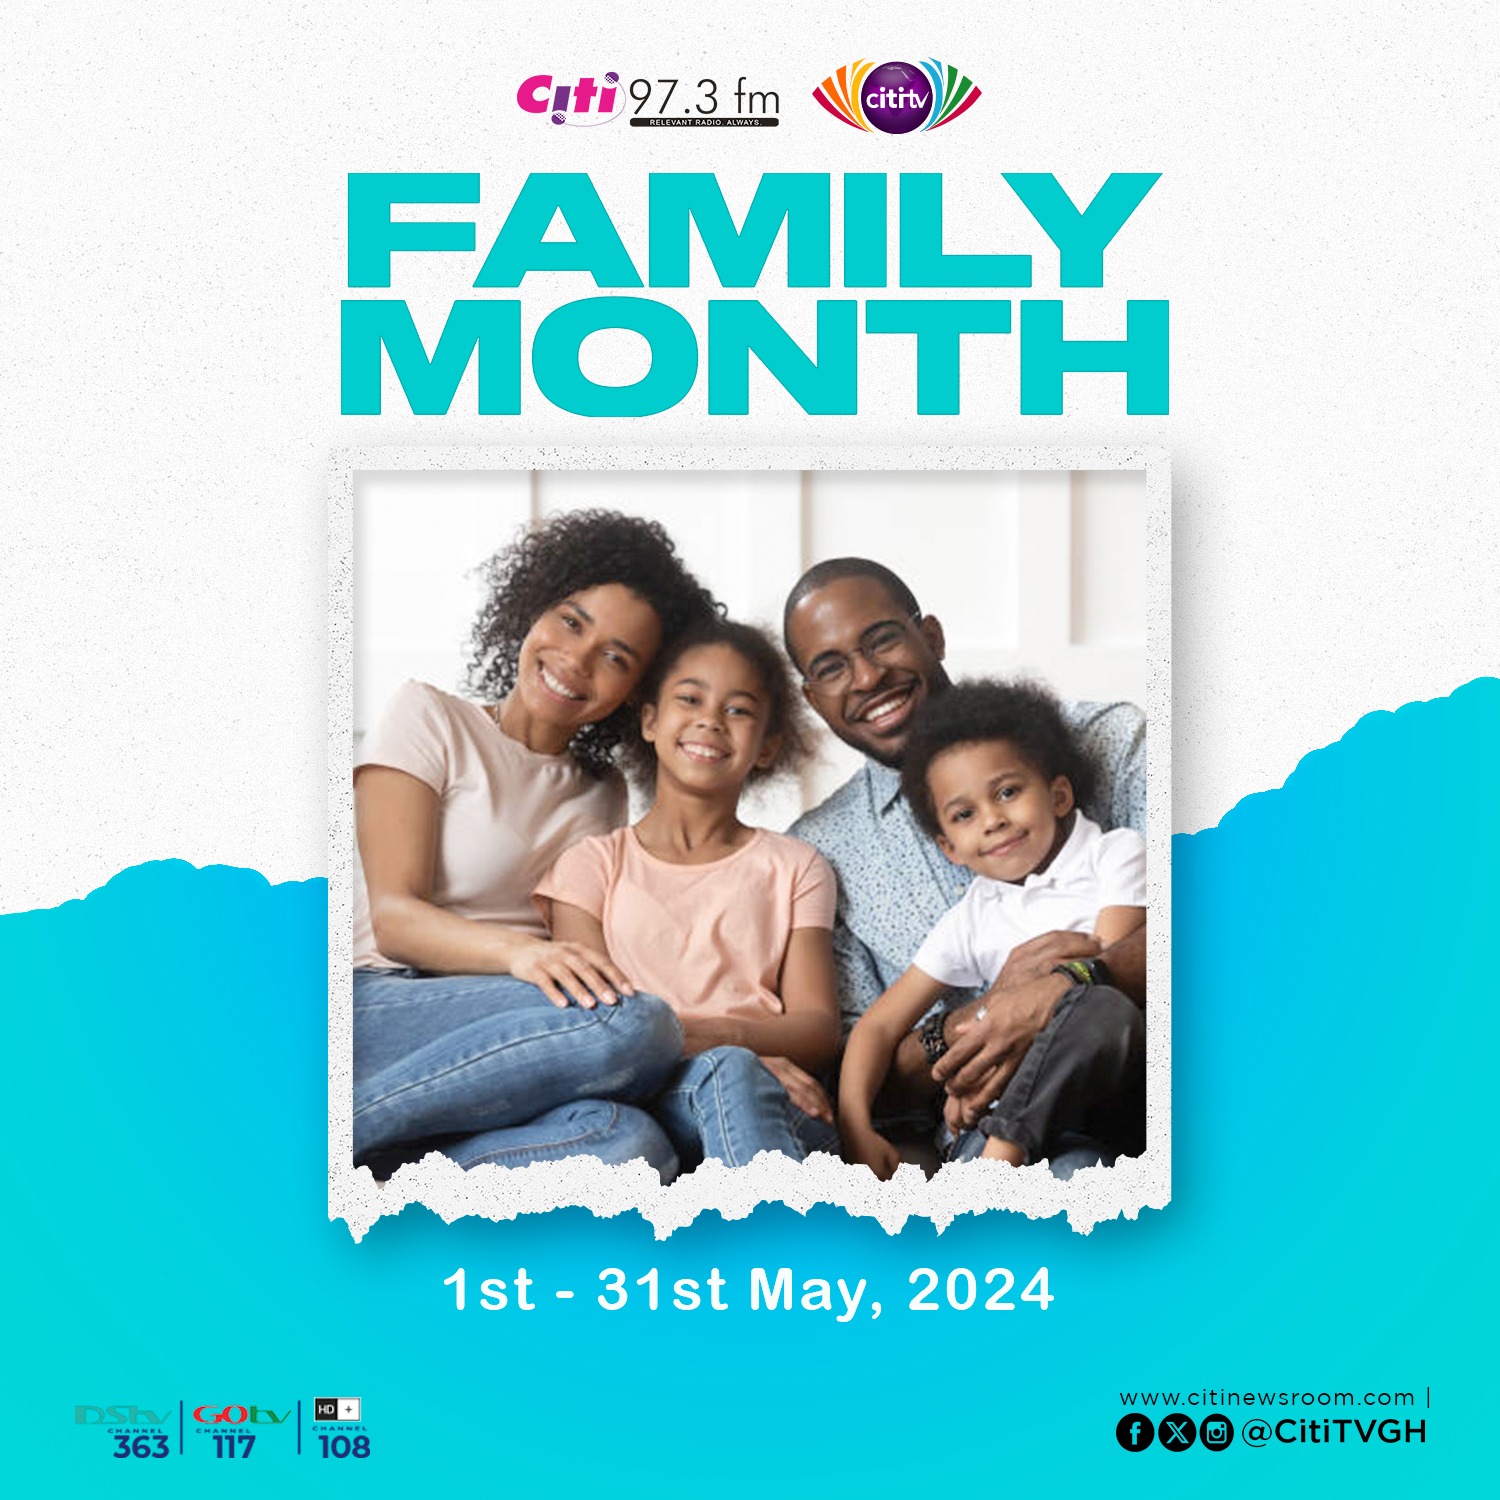 Citi FM/ Citi TV Mother’s Day Dinner comes off May 12